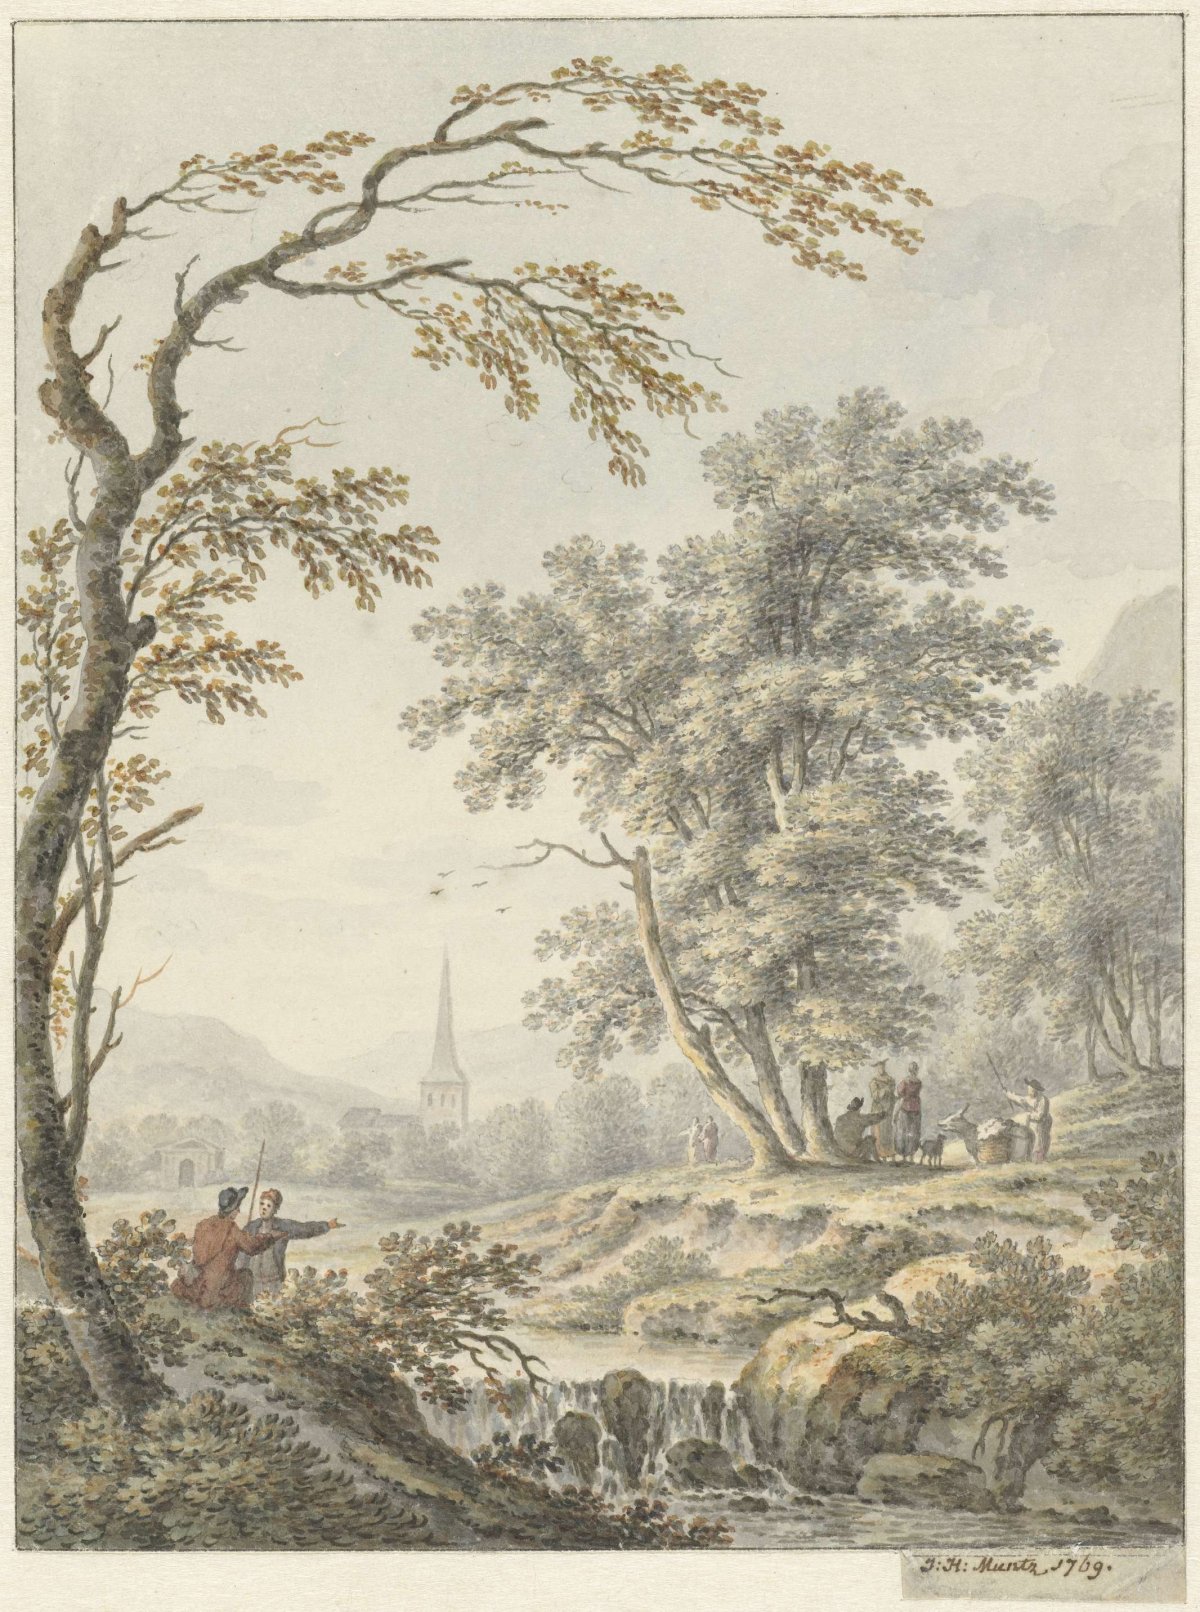 Landscape with waterfall and a church in the distance, Johann Heinrich Müntz, 1769